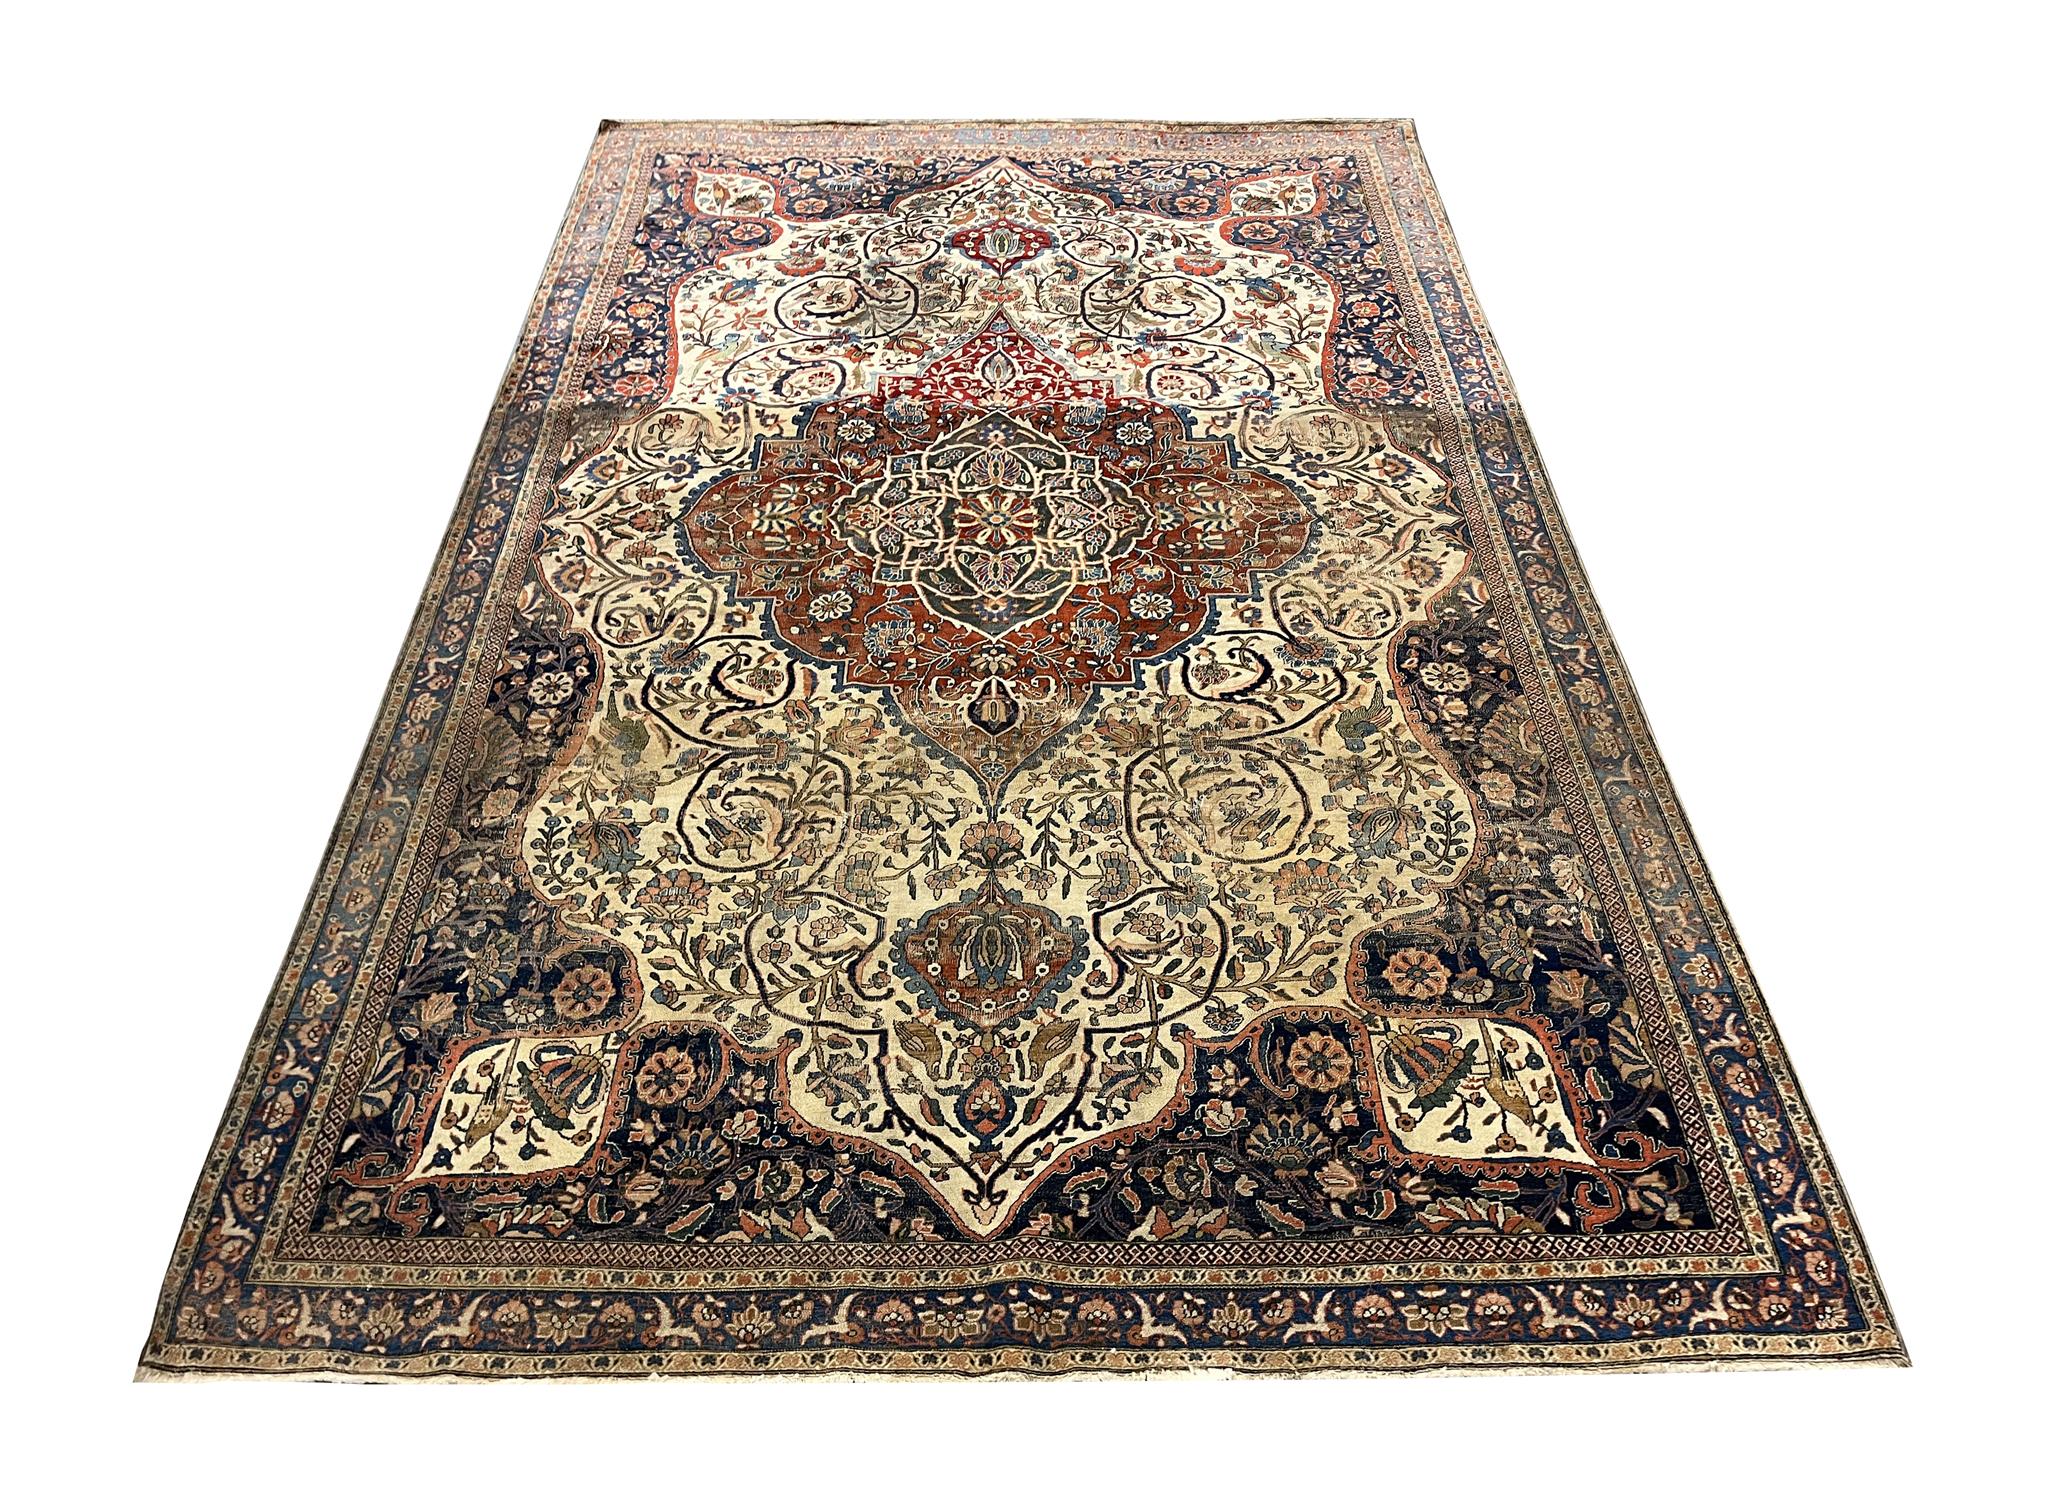 This antique area rug is a beautiful area rug woven in the late 19th century, circa 1870. There are slight signs of wear & tear in this rug, however, this only adds character to the overall aesthetic of this Kashan Mohtasham rug. It's sure to make a